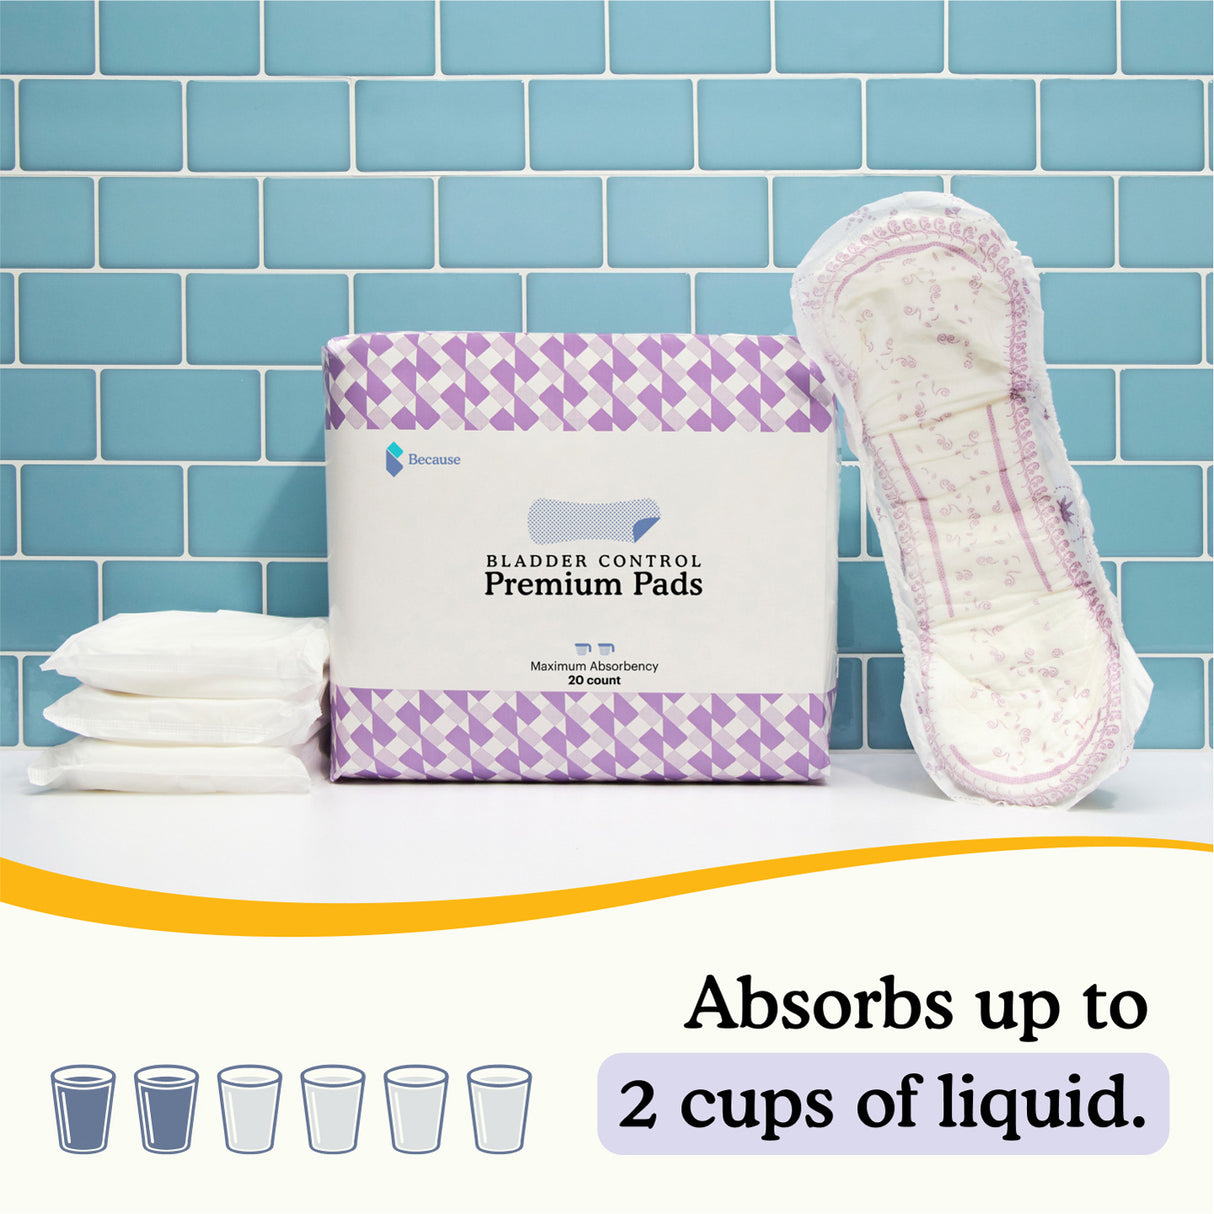 Premium maximum absorbency pads hold up to two cups of liquid